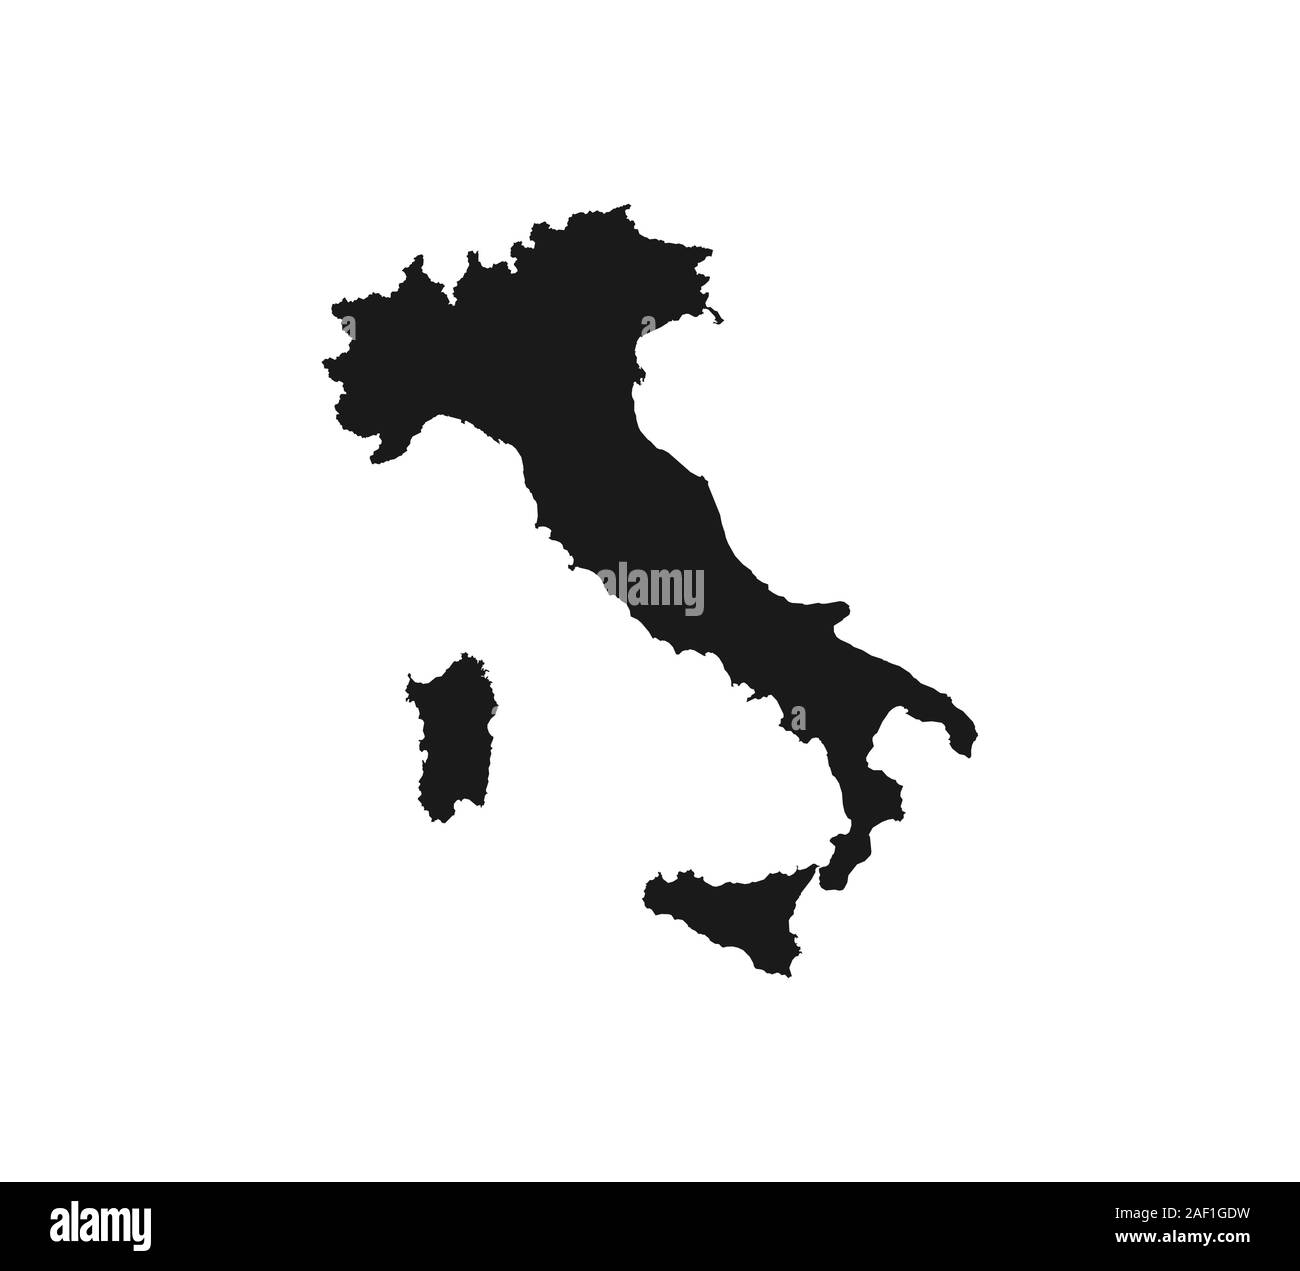 Italy map on white background. Vector illustration. Stock Vector